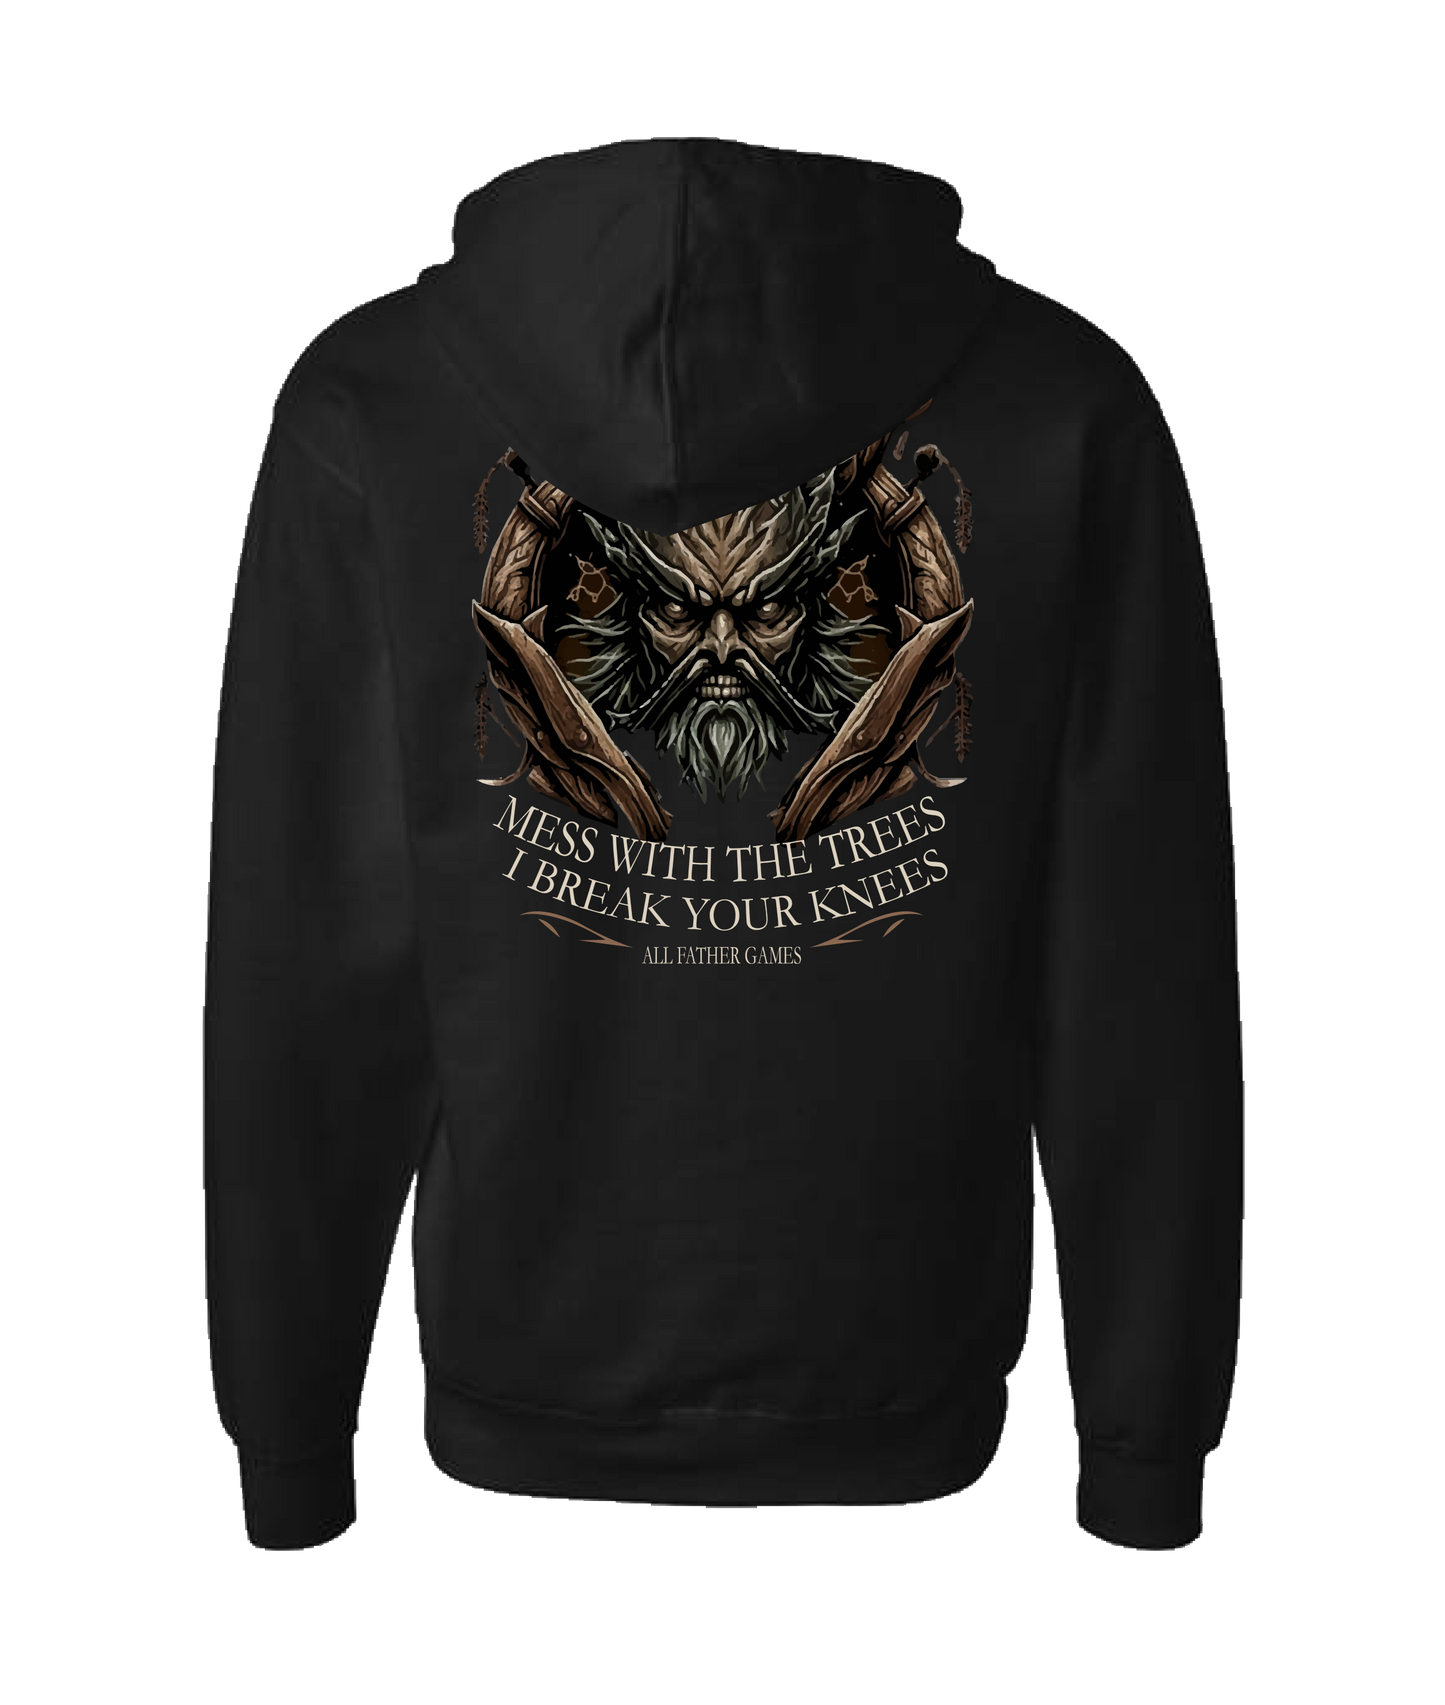 All Father Games - DON'T MESS WITH TREES - Black Zip Up Hoodie